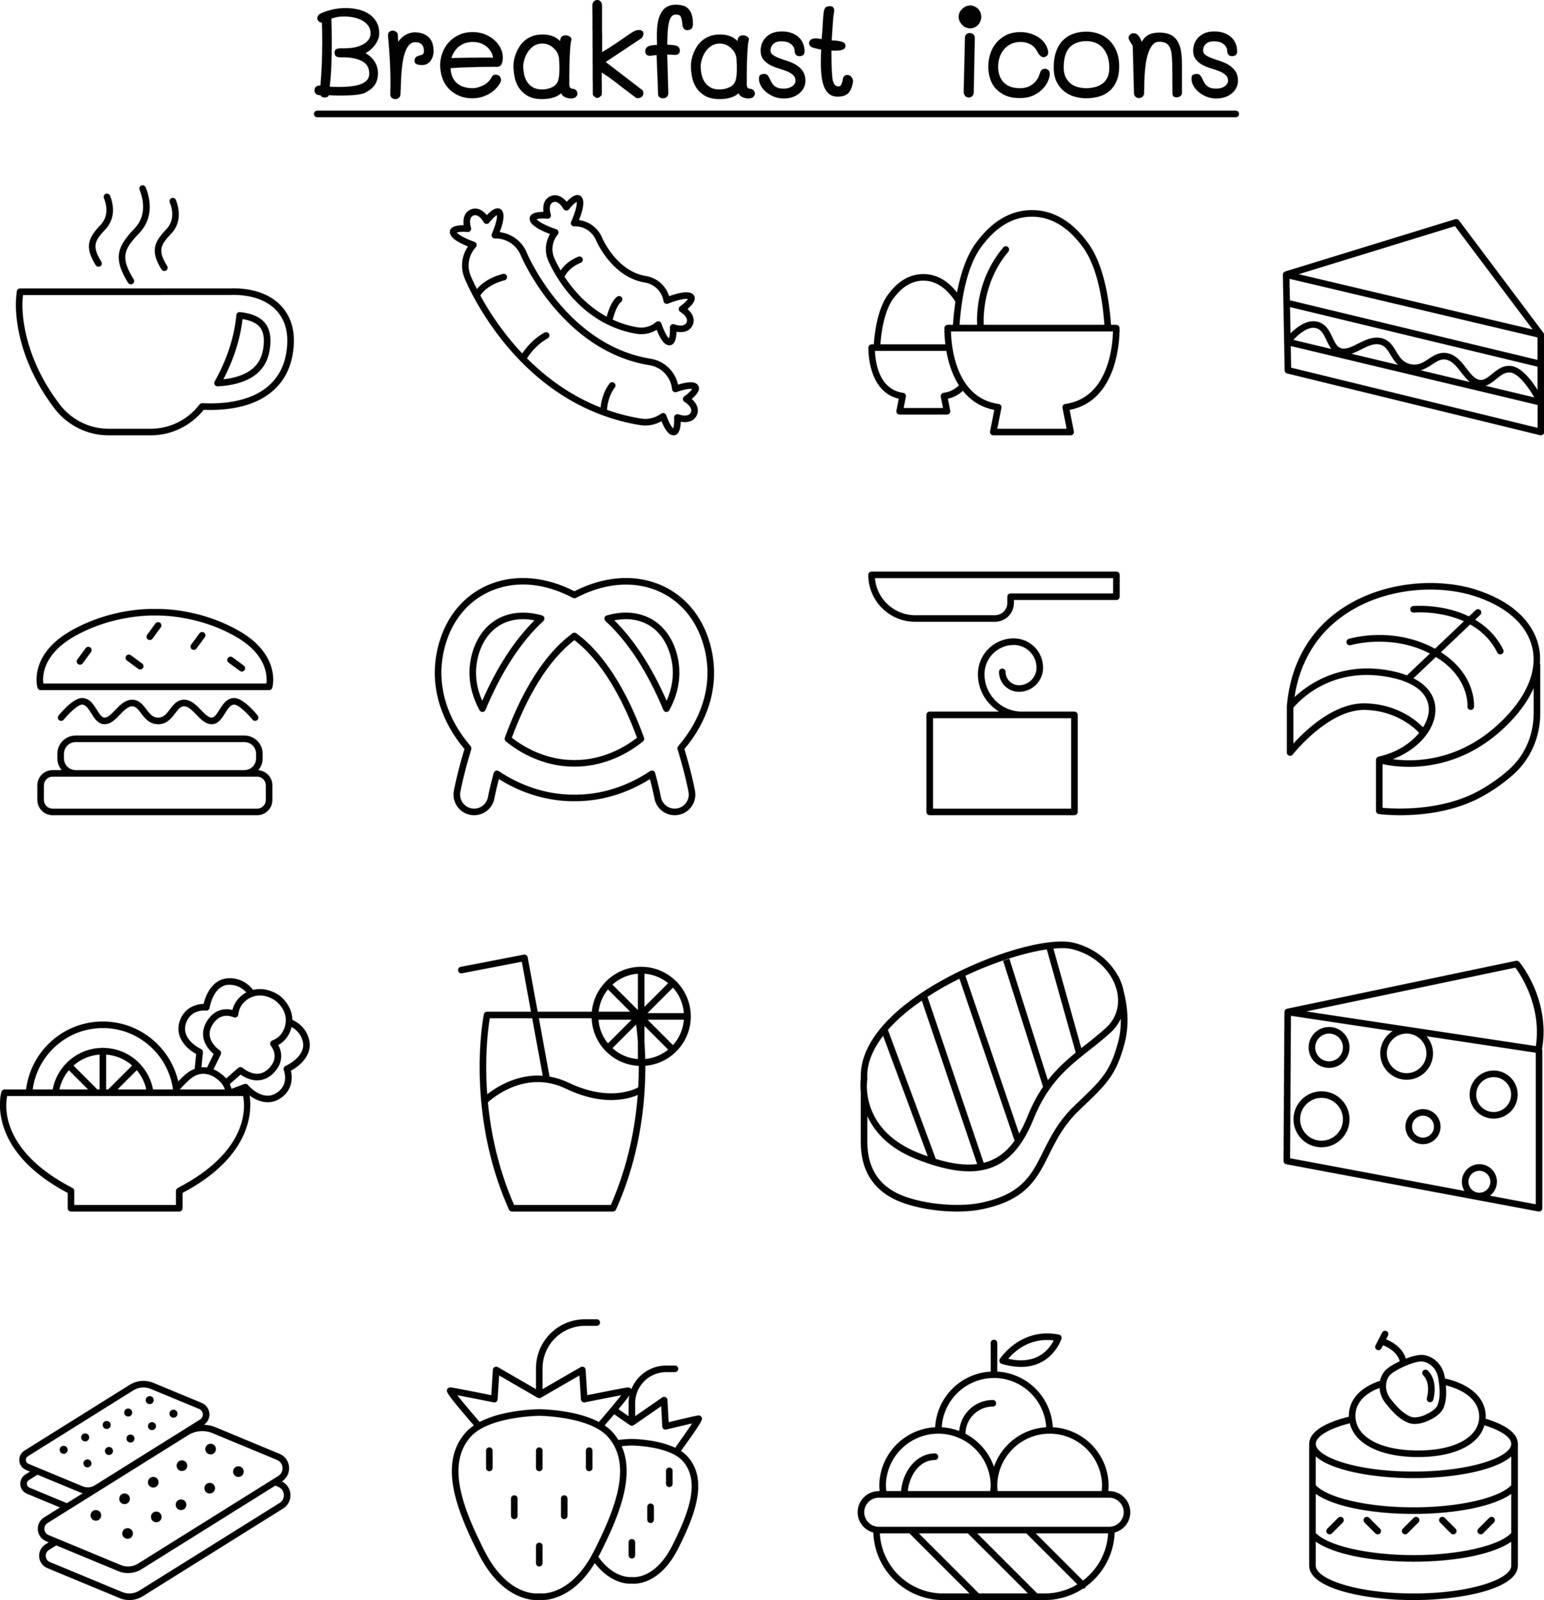 Breakfast icon set in thin line style